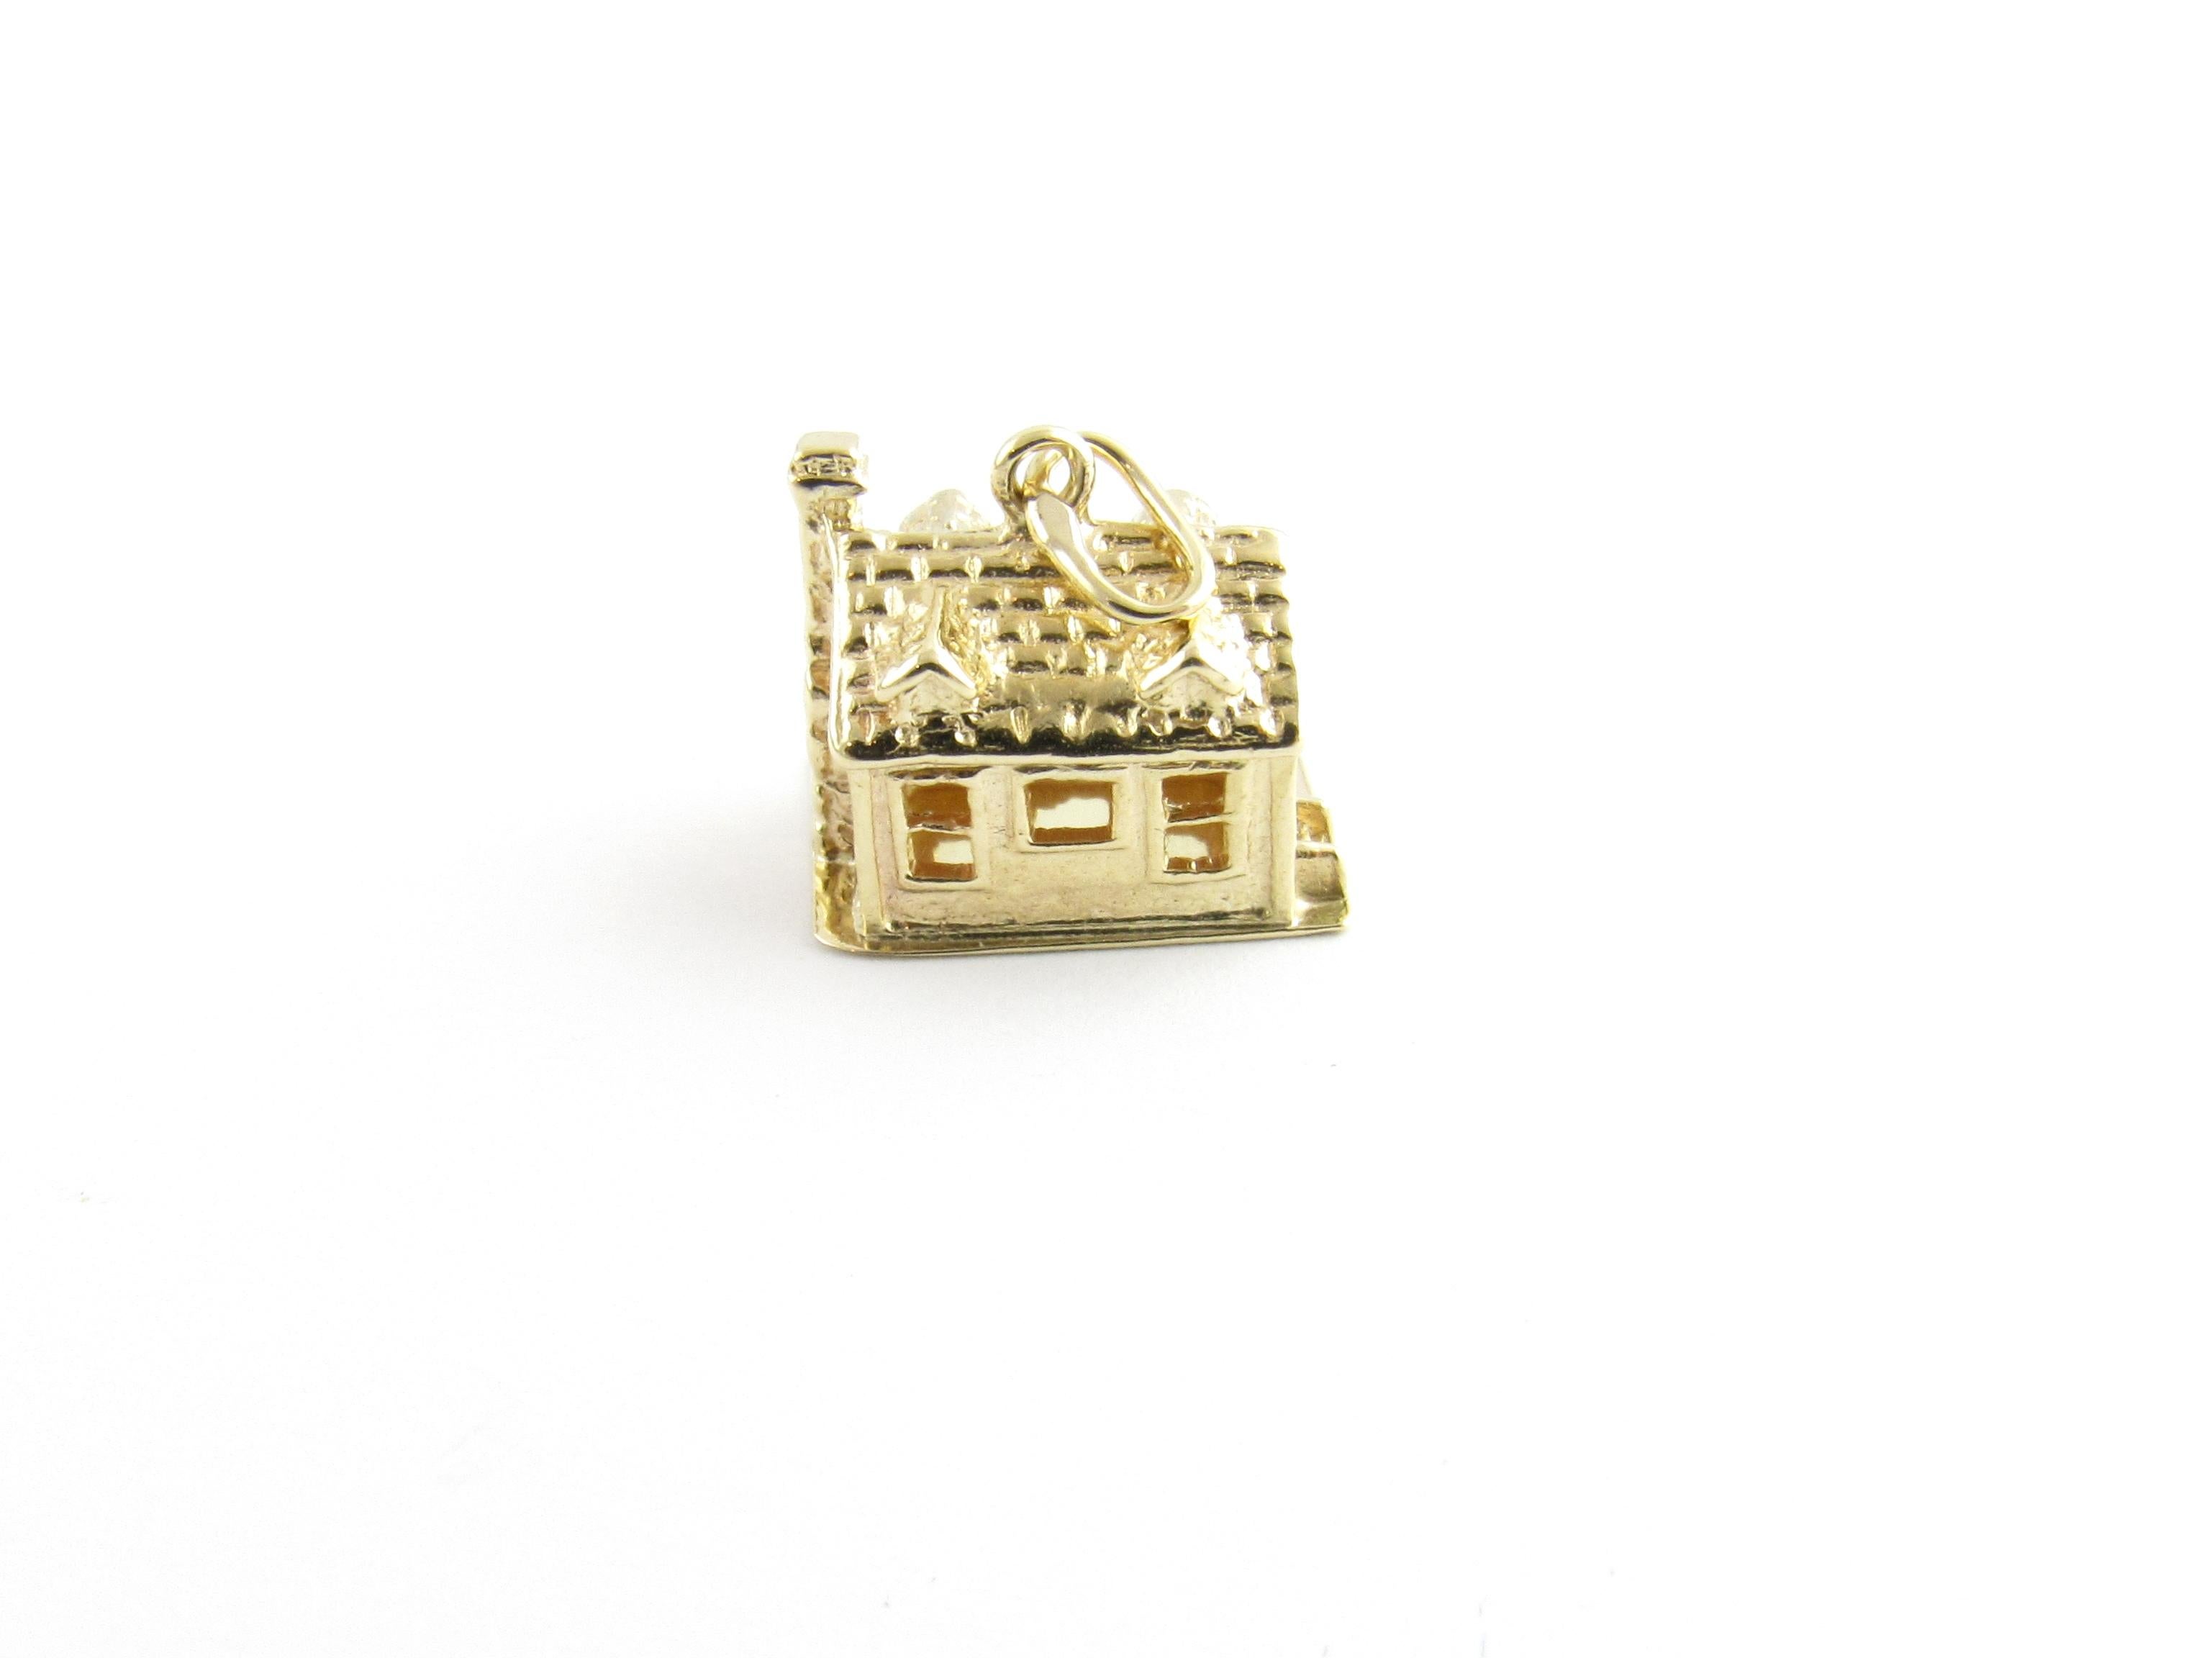 Vintage 14 Karat Yellow Gold House Charm

Home is where the heart is!

This lovely 3D charm features a beautifully detailed house crafted in classic 14K yellow gold.

Size: 12 mm x 14 mm (actual charm)

Weight: 2.8 dwt. / 4.4 gr.

Hallmark: